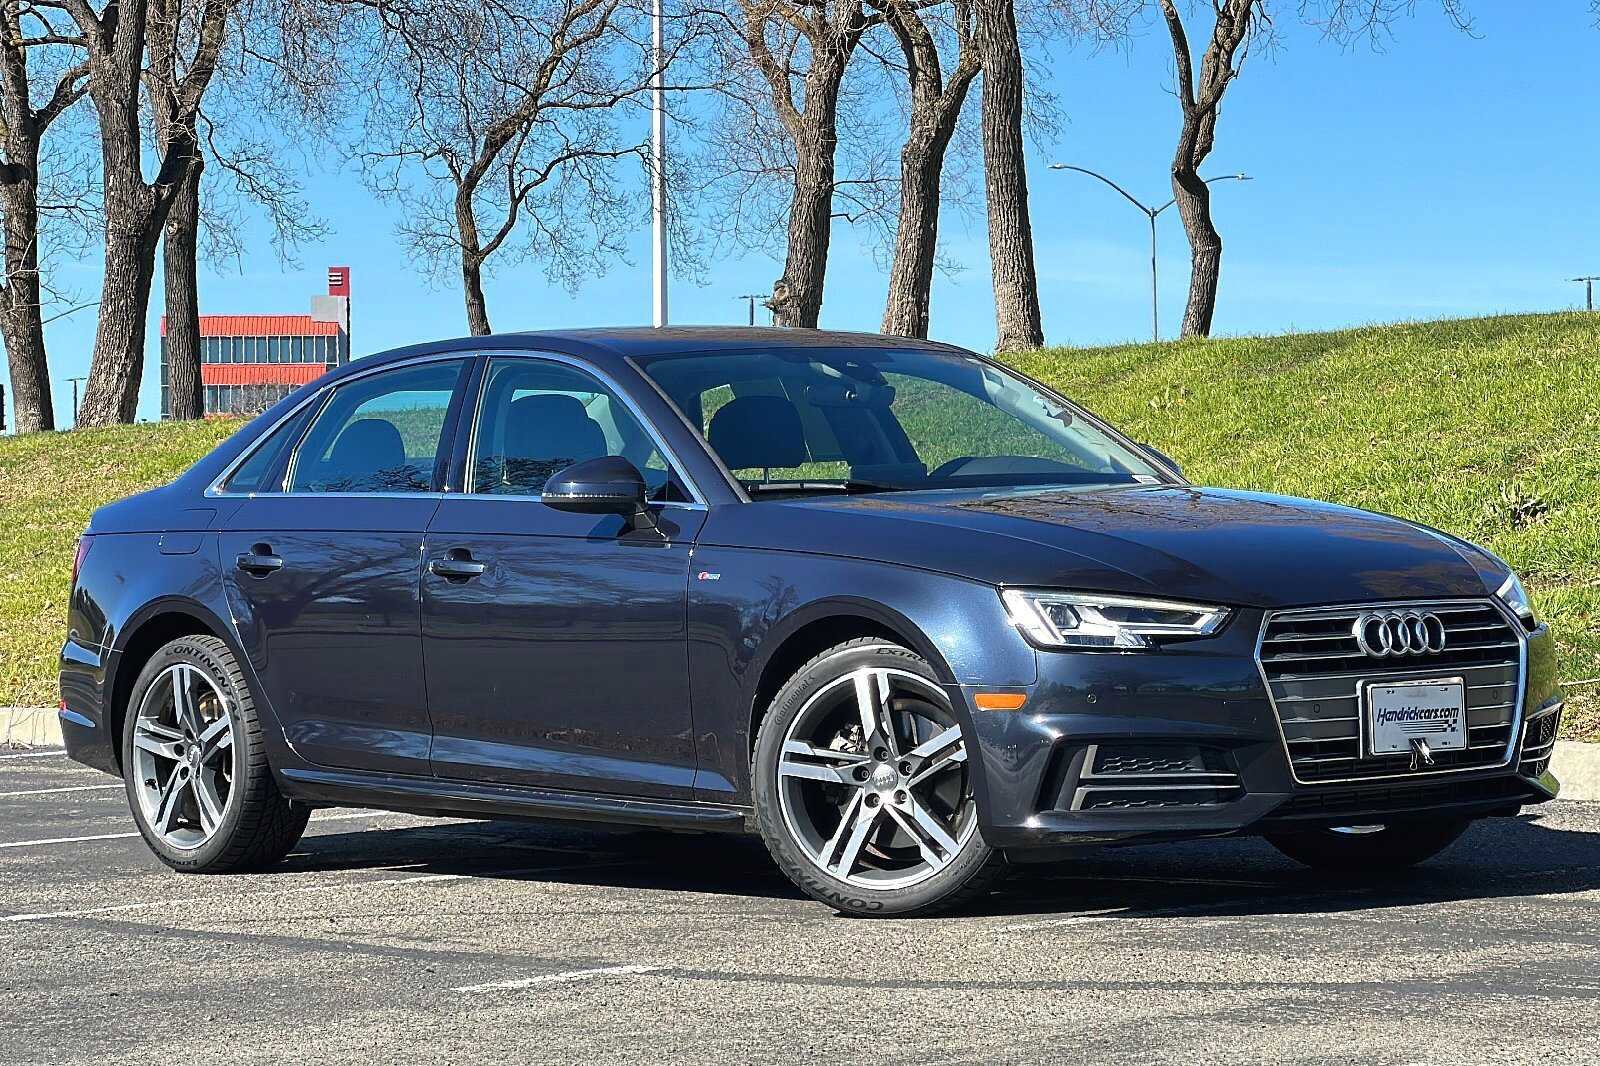 Pre-Owned 2018 Audi A4 Premium Plus Sedan in Cary #Z22609A | Hendrick Dodge  Cary